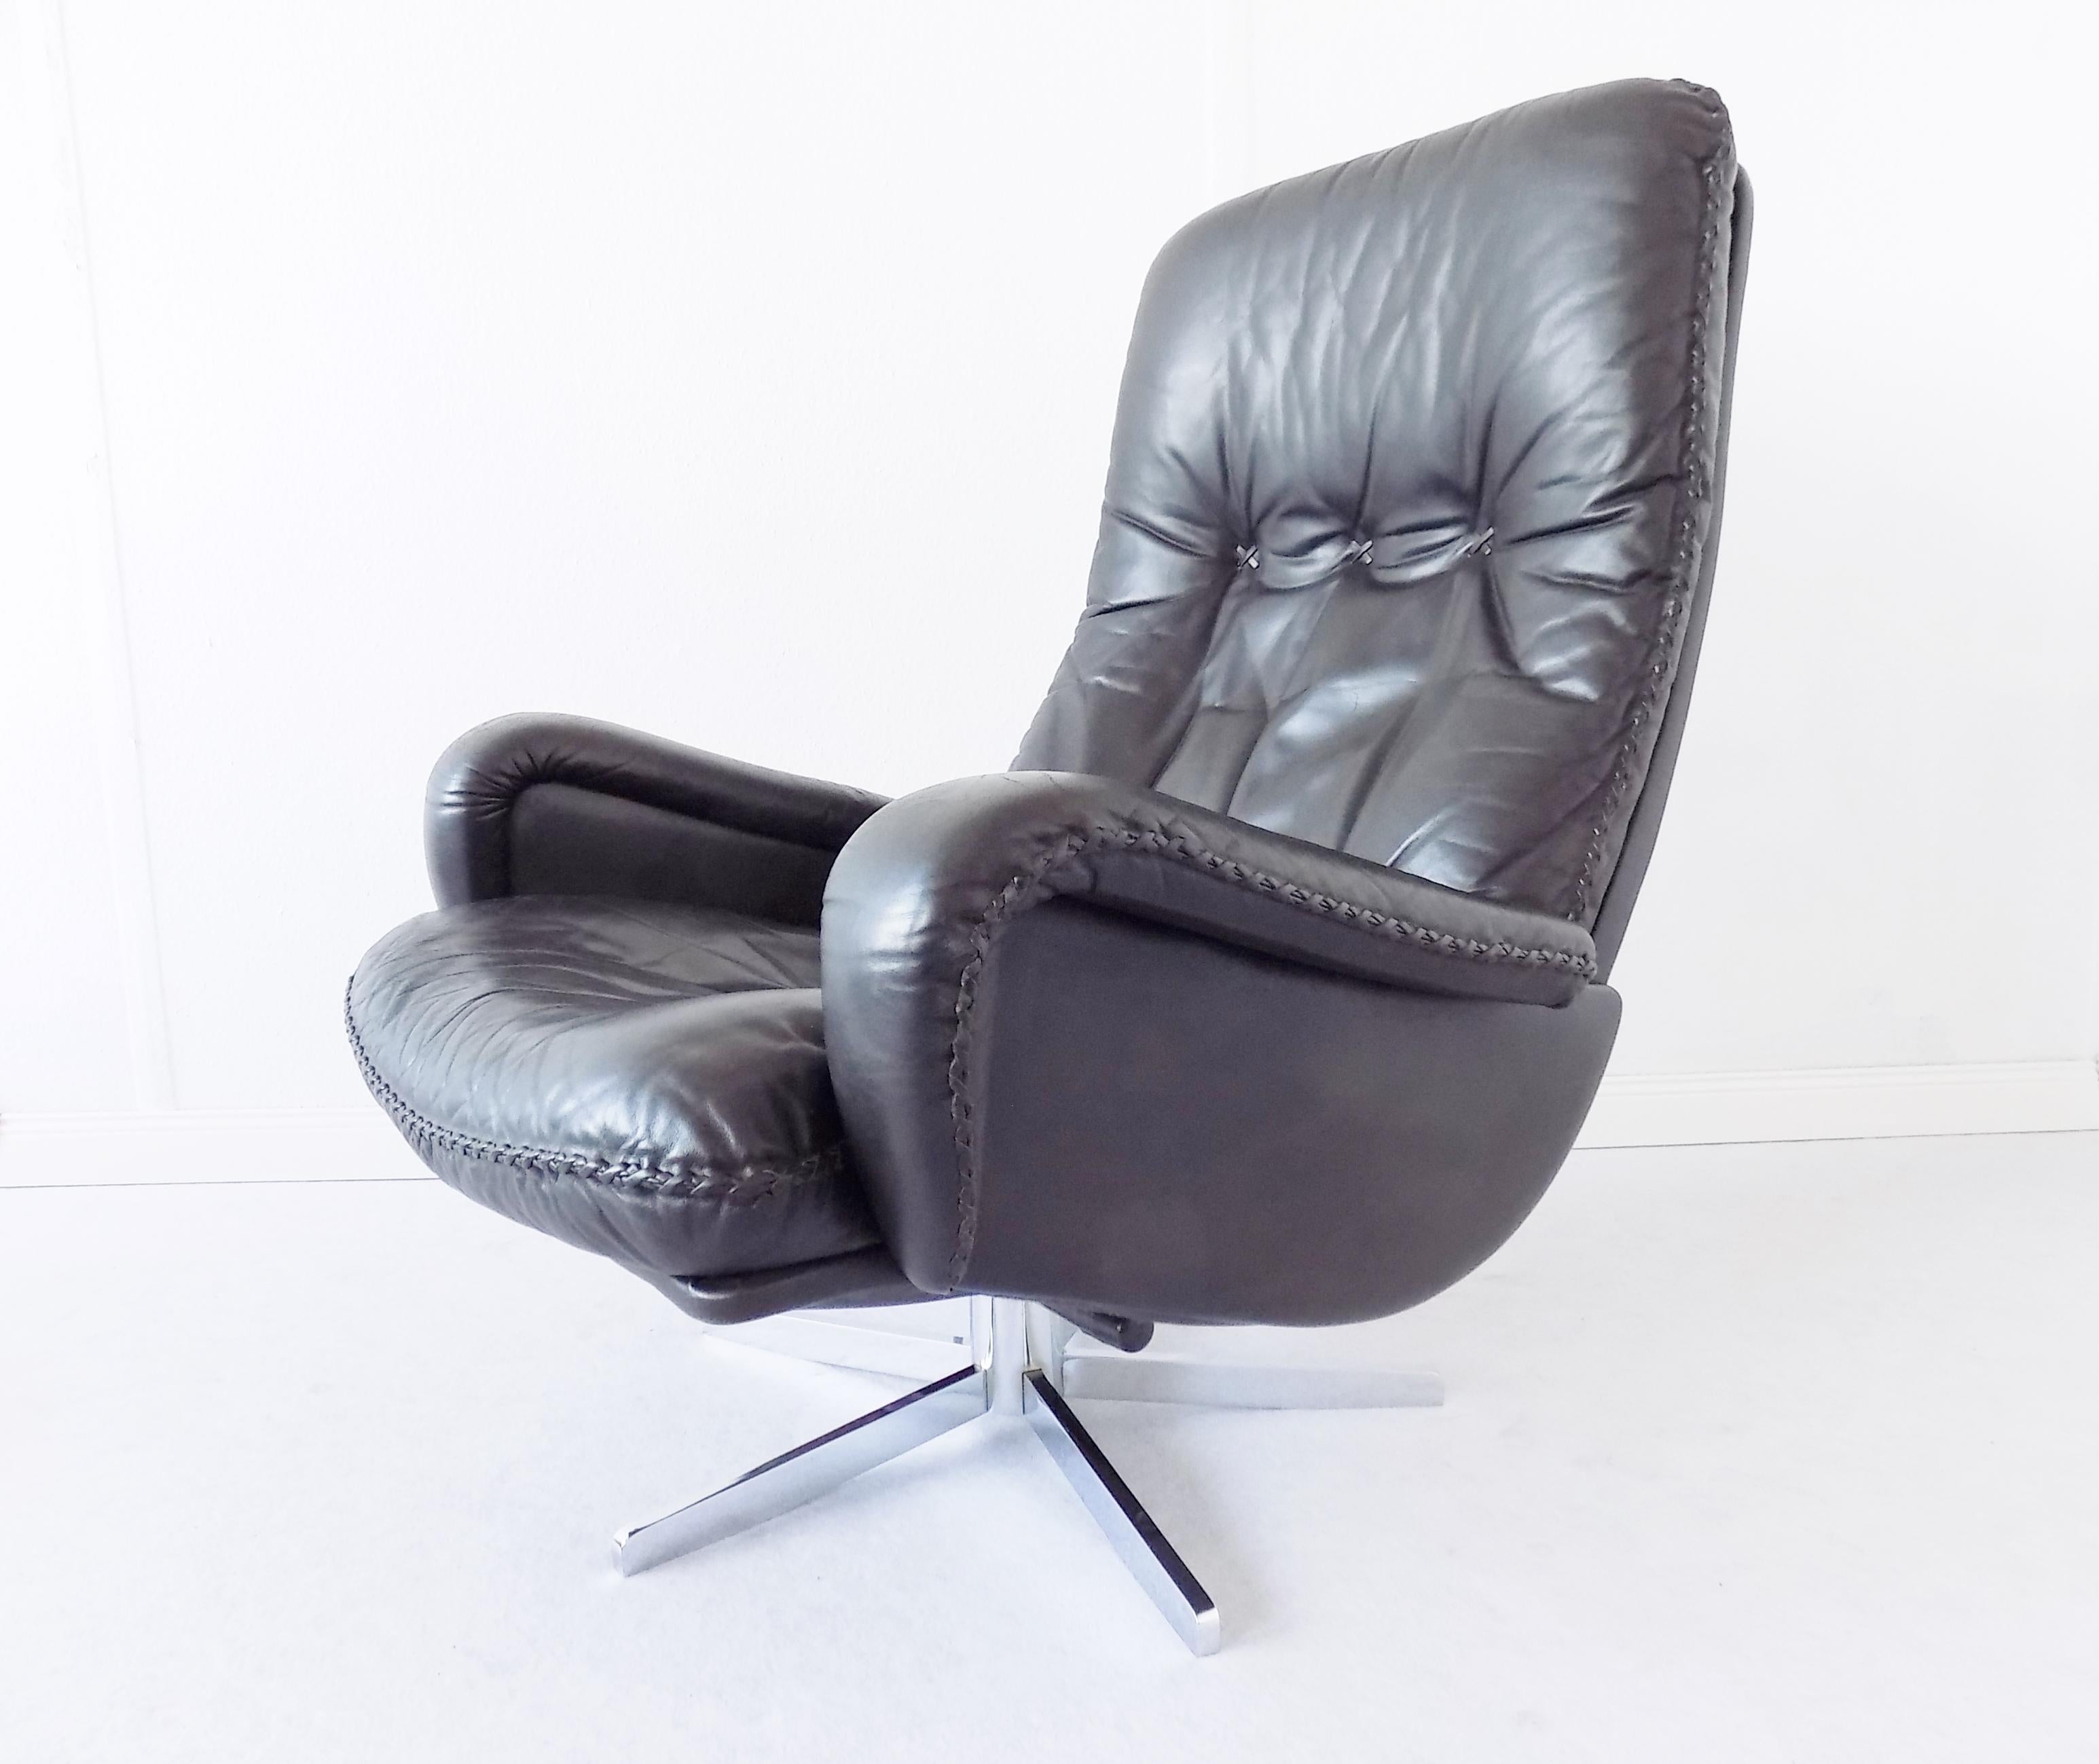 The De Sede S231 is one of the most sought after Classic Chairs since it was shown in the James Bond movie in 1969. A timeless design icon made by the Swiss manufacturer De Sede which are well know for their products made in traditional craftmanship